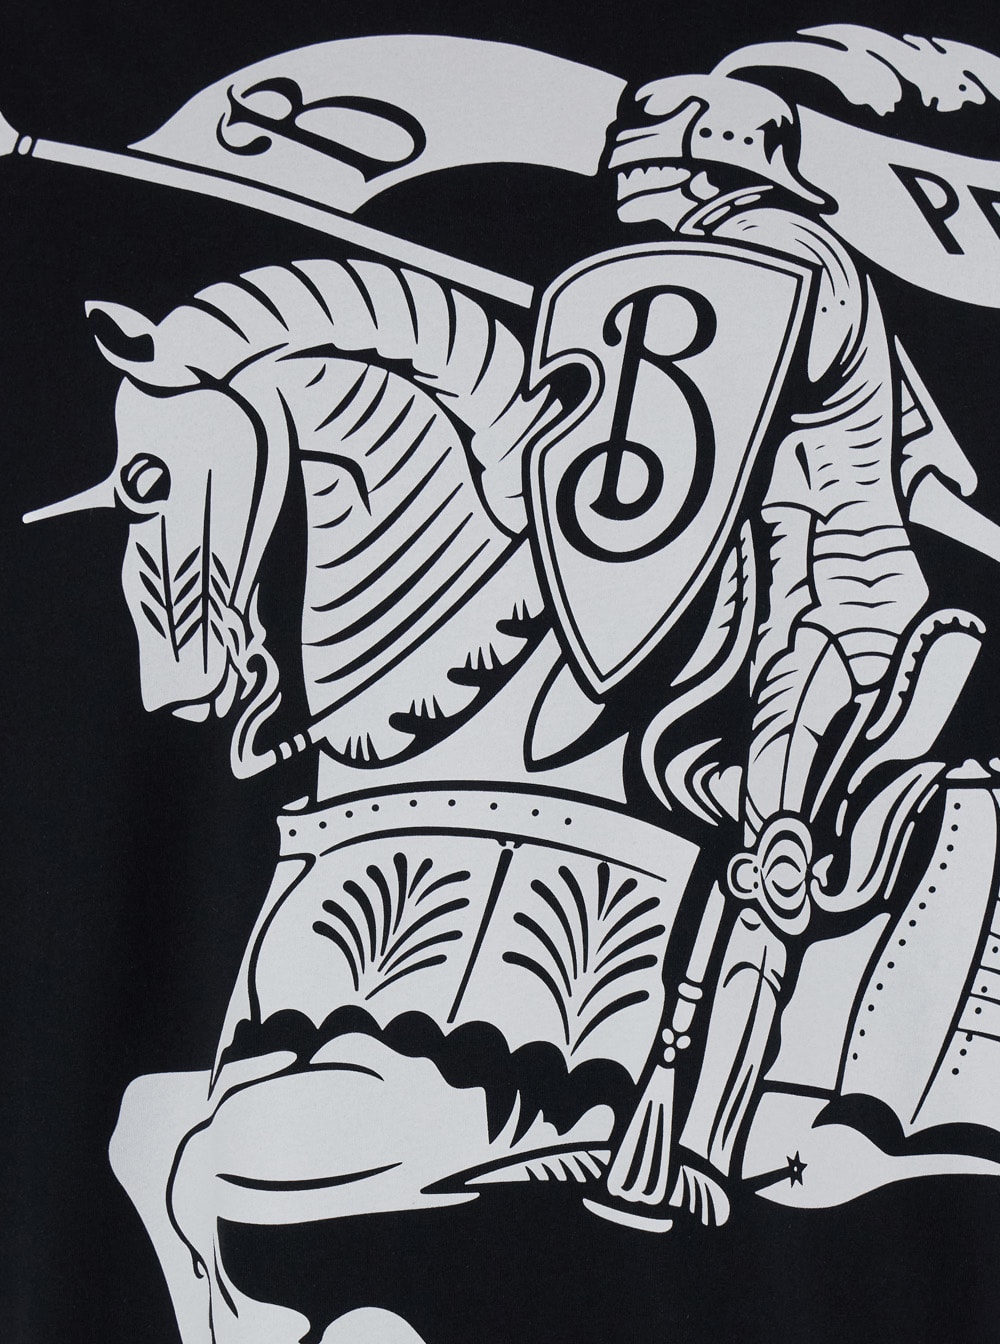 Shop Burberry Black T-shirt With Contrasting Equestrian Knight Print In Cotton Man